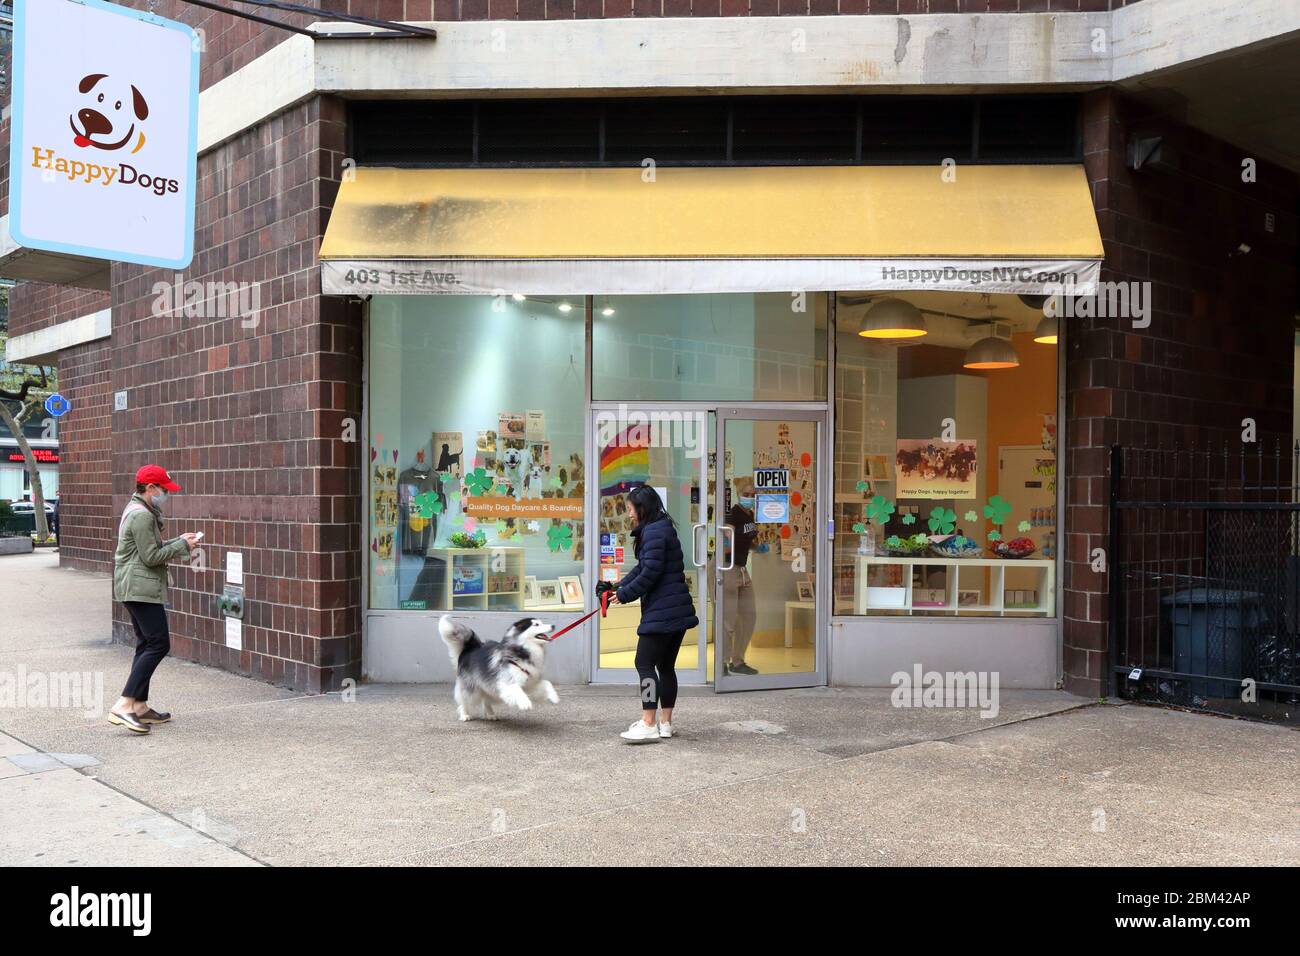 Happy Dogs, 403 1st Avenue, New York, NYC storefront photo of a doggie day care in Manhattan. Stock Photo